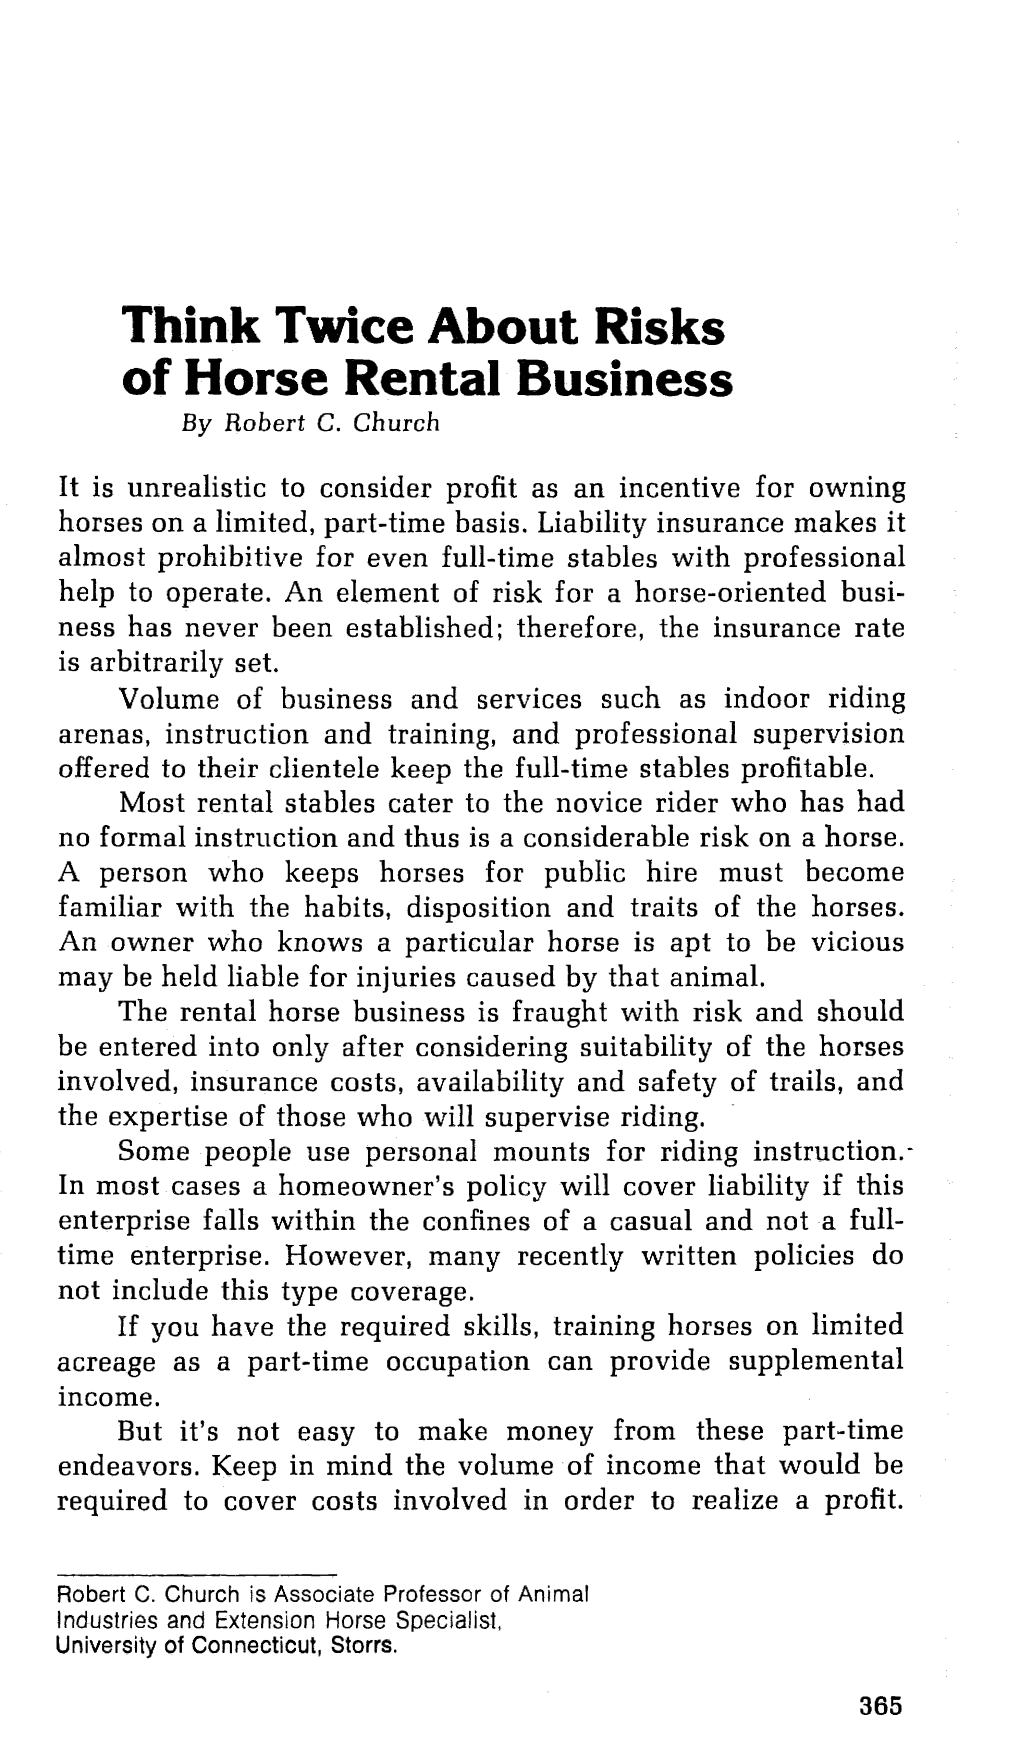 Think Twice About Risks of Horse Rental Business by Robert C